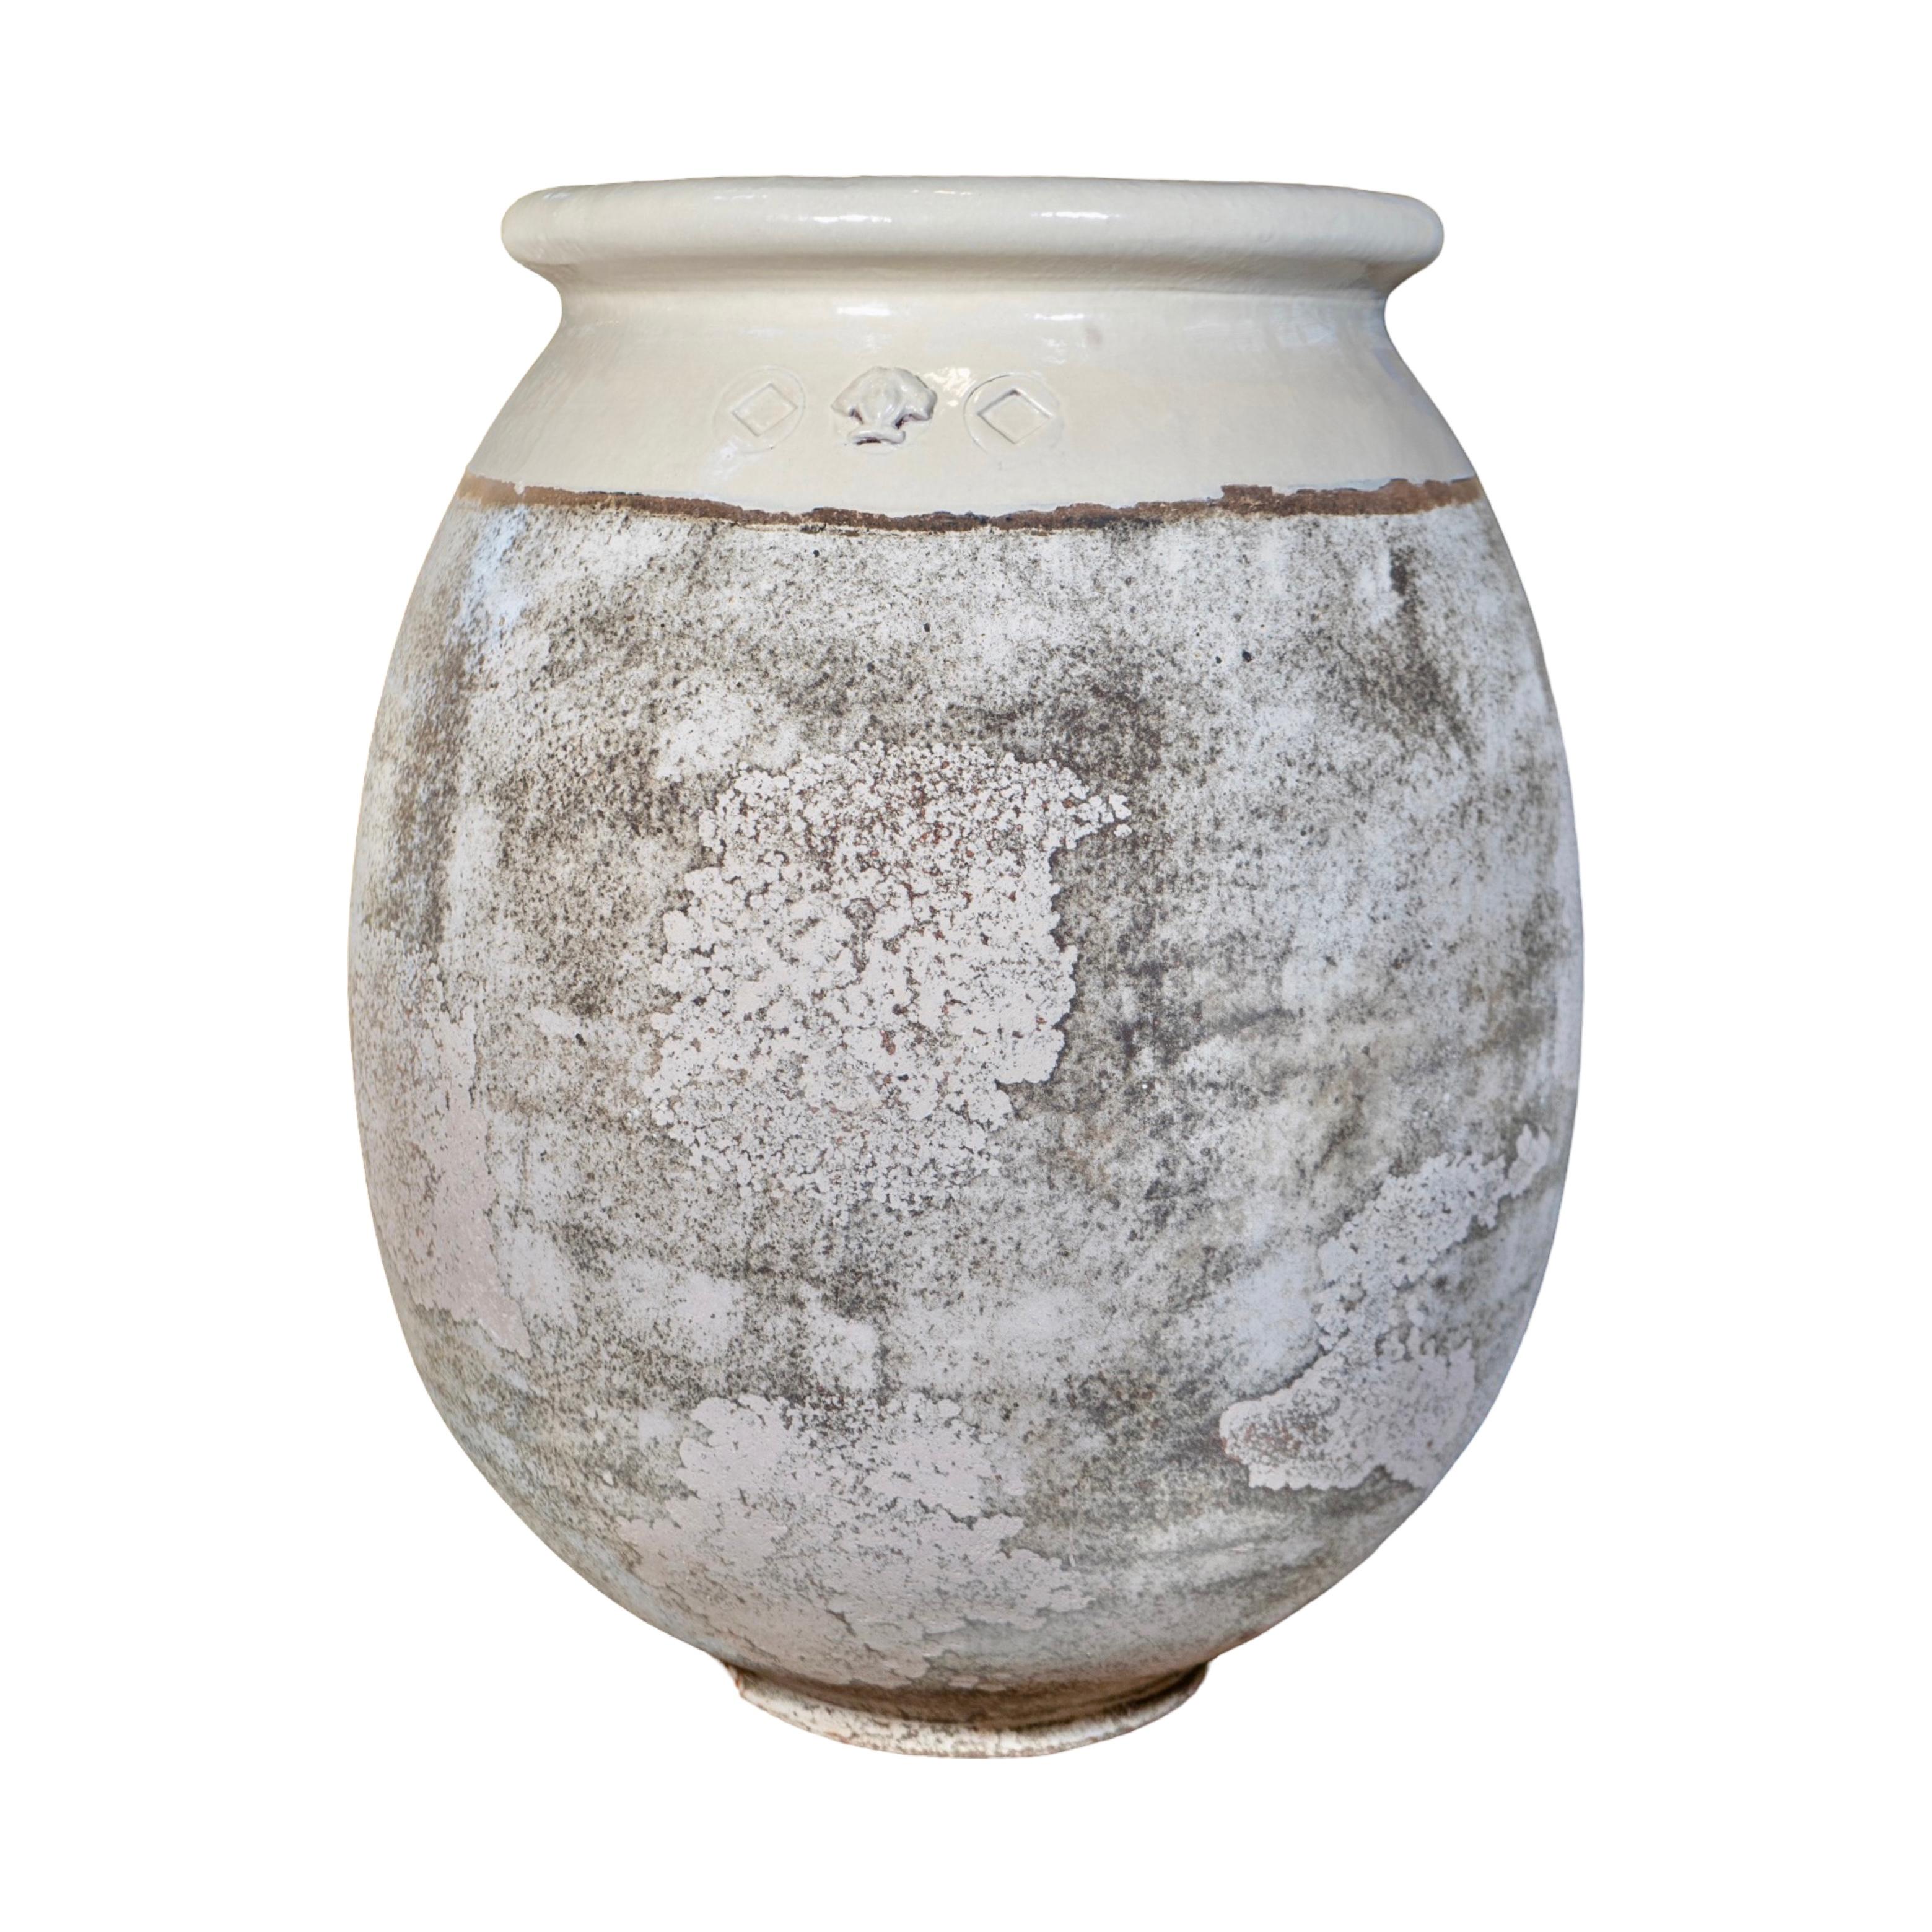 This French Terracotta Glazed Planter is a contemporary piece, handmade in France, with a glazed beige finish and a textured surface for a beautifully aged look. Crafted from genuine terracotta, it features a carved medusa motif in the center for an